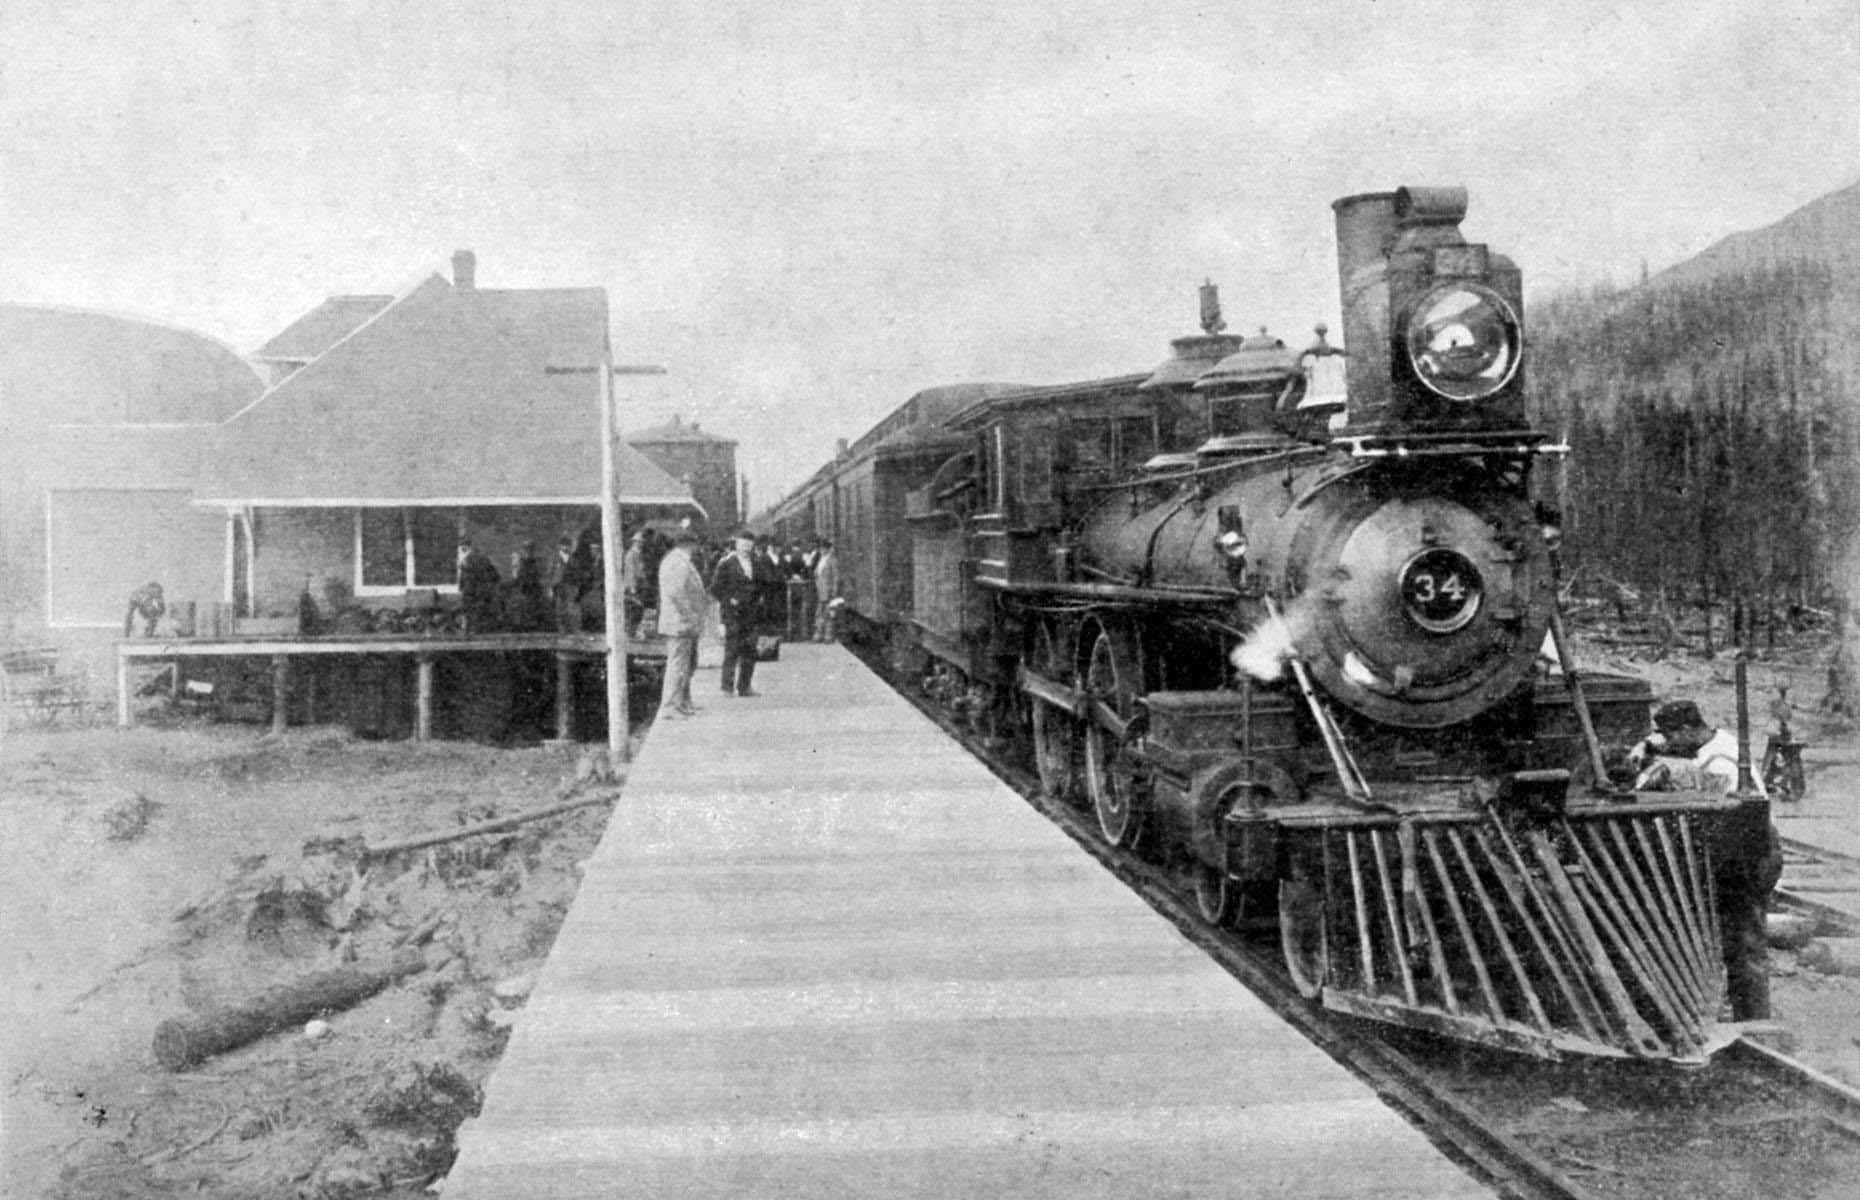 <p>Built between 1881 and 1885, the Canadian Pacific Railway's first line connected eastern Canada with British Columbia – an incredible achievement considering the diverse landscape the train had to traverse. The first train to travel the full route departed Montreal's Dalhousie Station at 8pm on 28 June 1886 and reached the final terminus on the western seaboard, Port Moody, at noon on 4 July. Here, that first train is photographed in Fernie, some 600 miles (900km) east from Port Moody.</p>  <p><a href="https://www.loveexploring.com/galleries/97614/incredible-images-that-capture-the-history-of-train-travel?page=1"><strong>Take a look at incredible images that capture the history of train travel</strong></a></p>